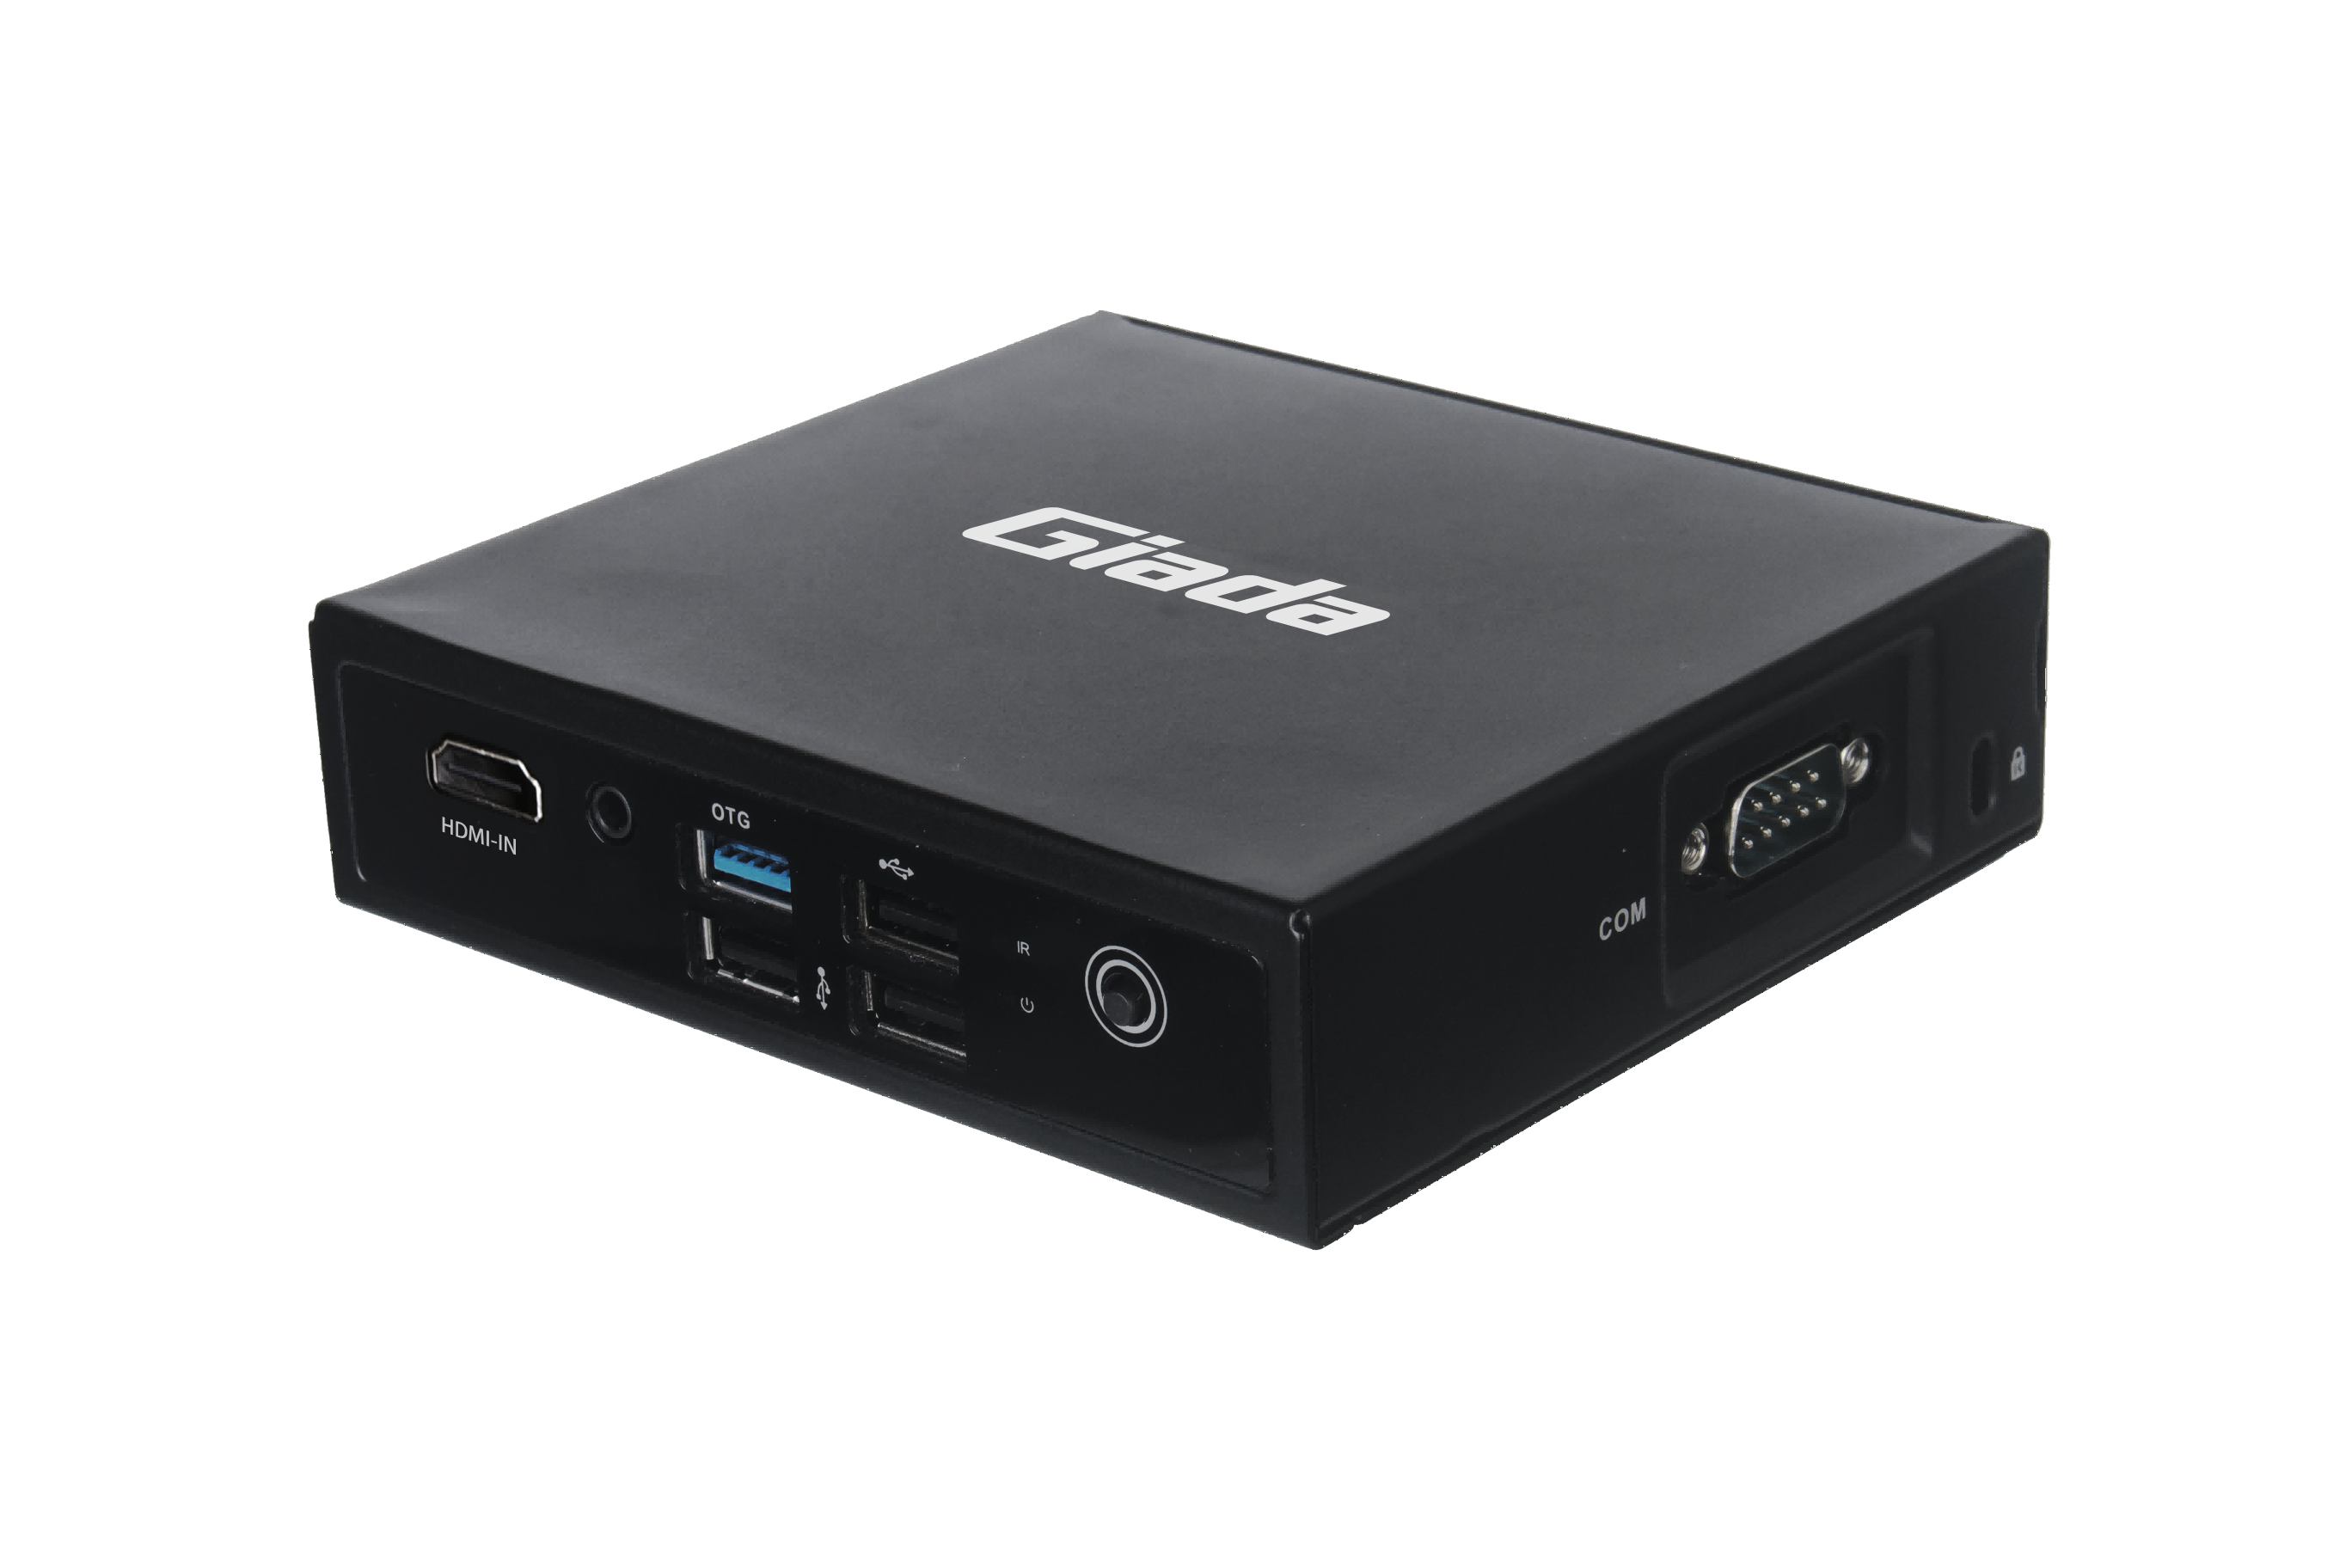 Giada DN75 RK3399 Fanless ARM Box with Dual-HDMI and HDMI-IN